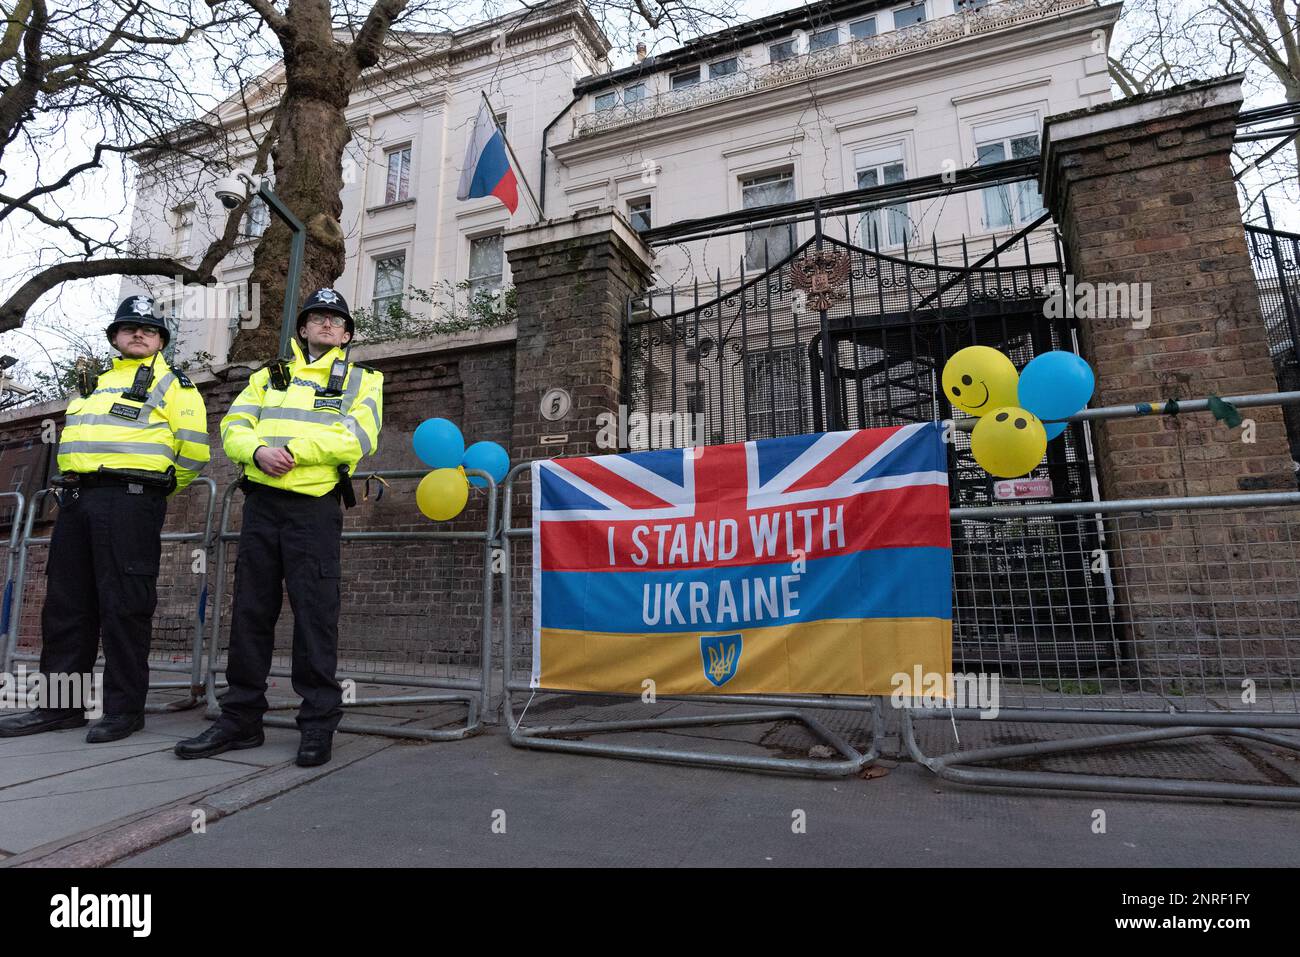 London, UK. 24 February, 2023. The entrance of the Embassy of Russian where a flag proclaiming 'I Stand With Ukraine' has been tied, with baloons, whi Stock Photo